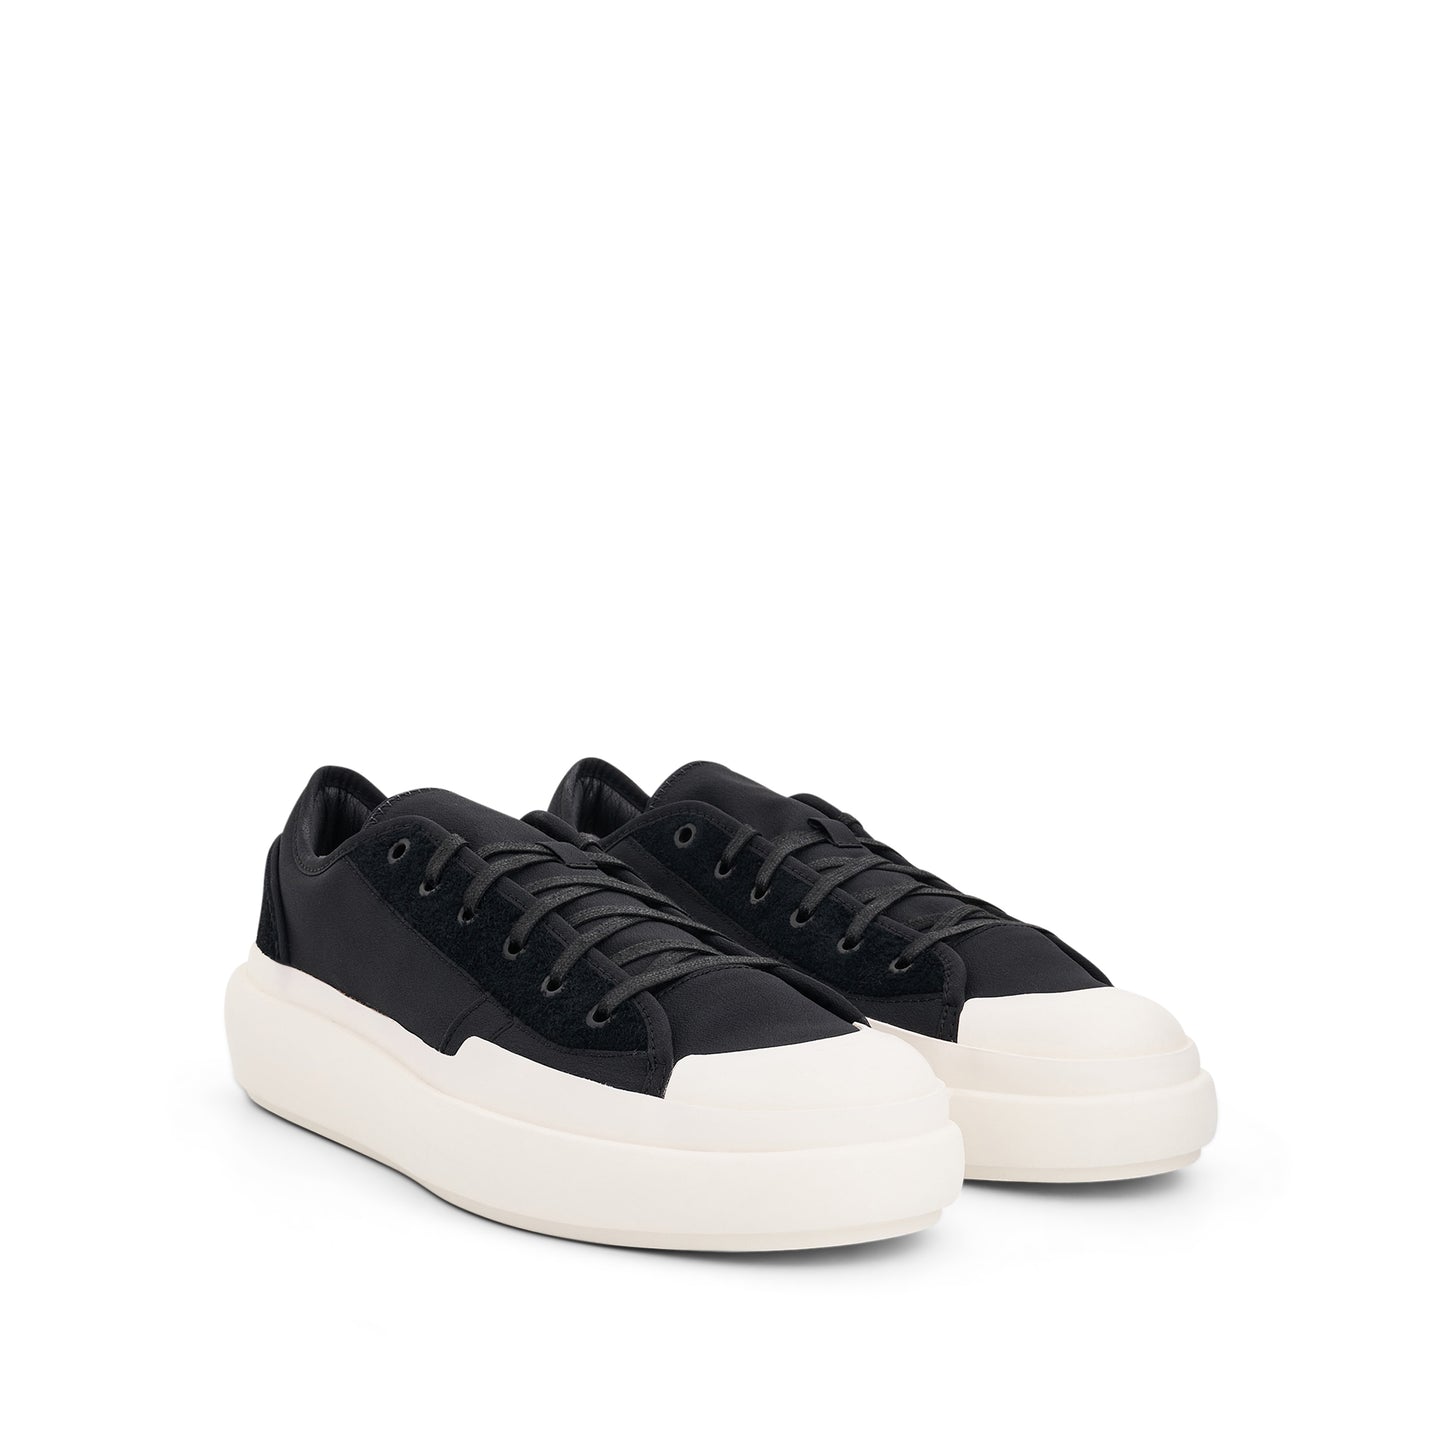 Ajatu Court Low Sneakers in Black/Off White